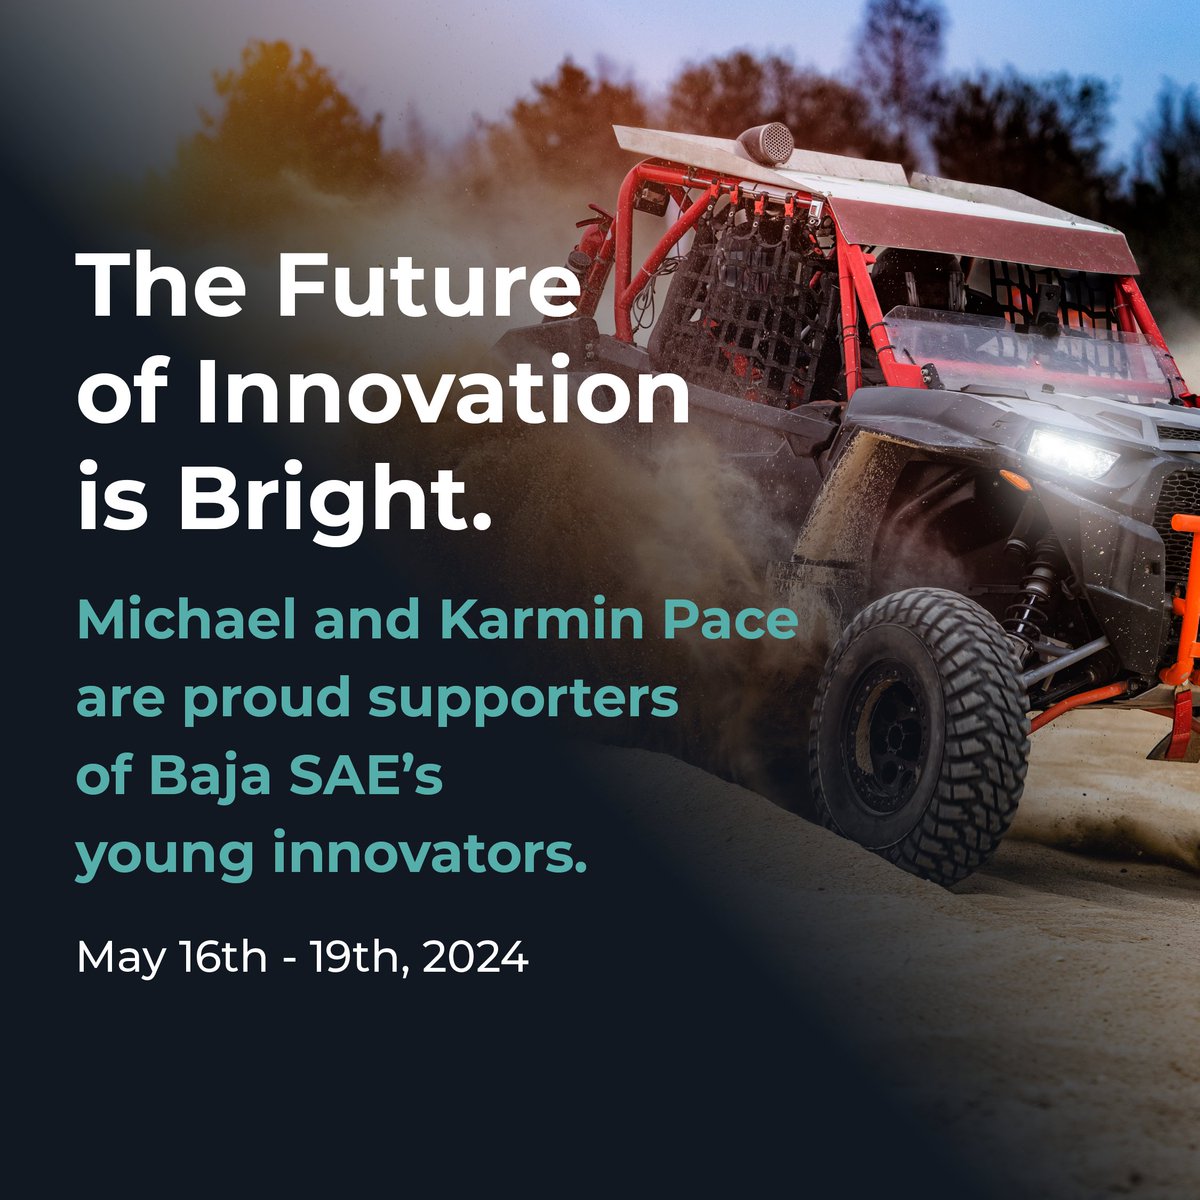 TOMORROW! Penn State is hosting their Baja SAE Competition May 16th -19th, where Michael and Karmin Pace, along with Pace-O-Matic, will be supporting the young inventors during their annual competition.